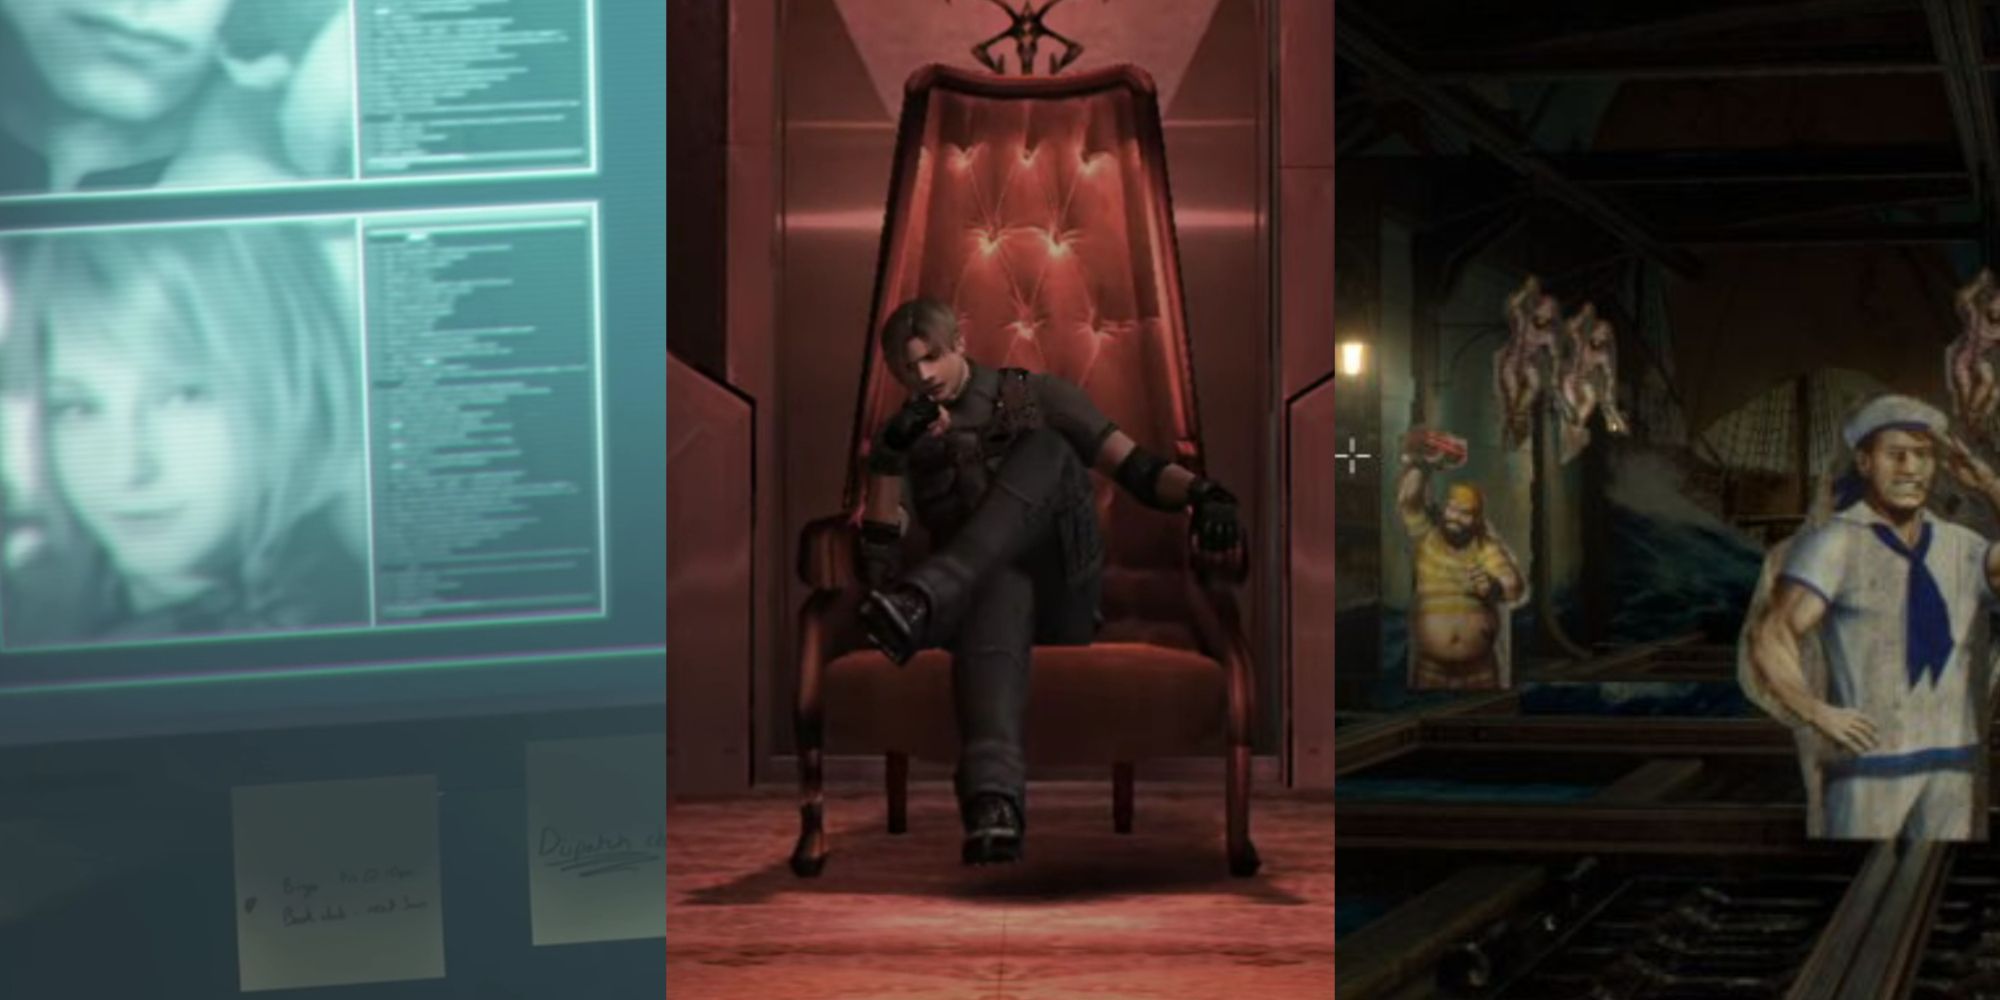 A three-image collage of Hunnigan's computer screen from the end of RE4 Remake with Bingo note, the original 2005 Leon Kennedy sitting on the throne, and the shooting gallery from Resident Evil 4 Remake.